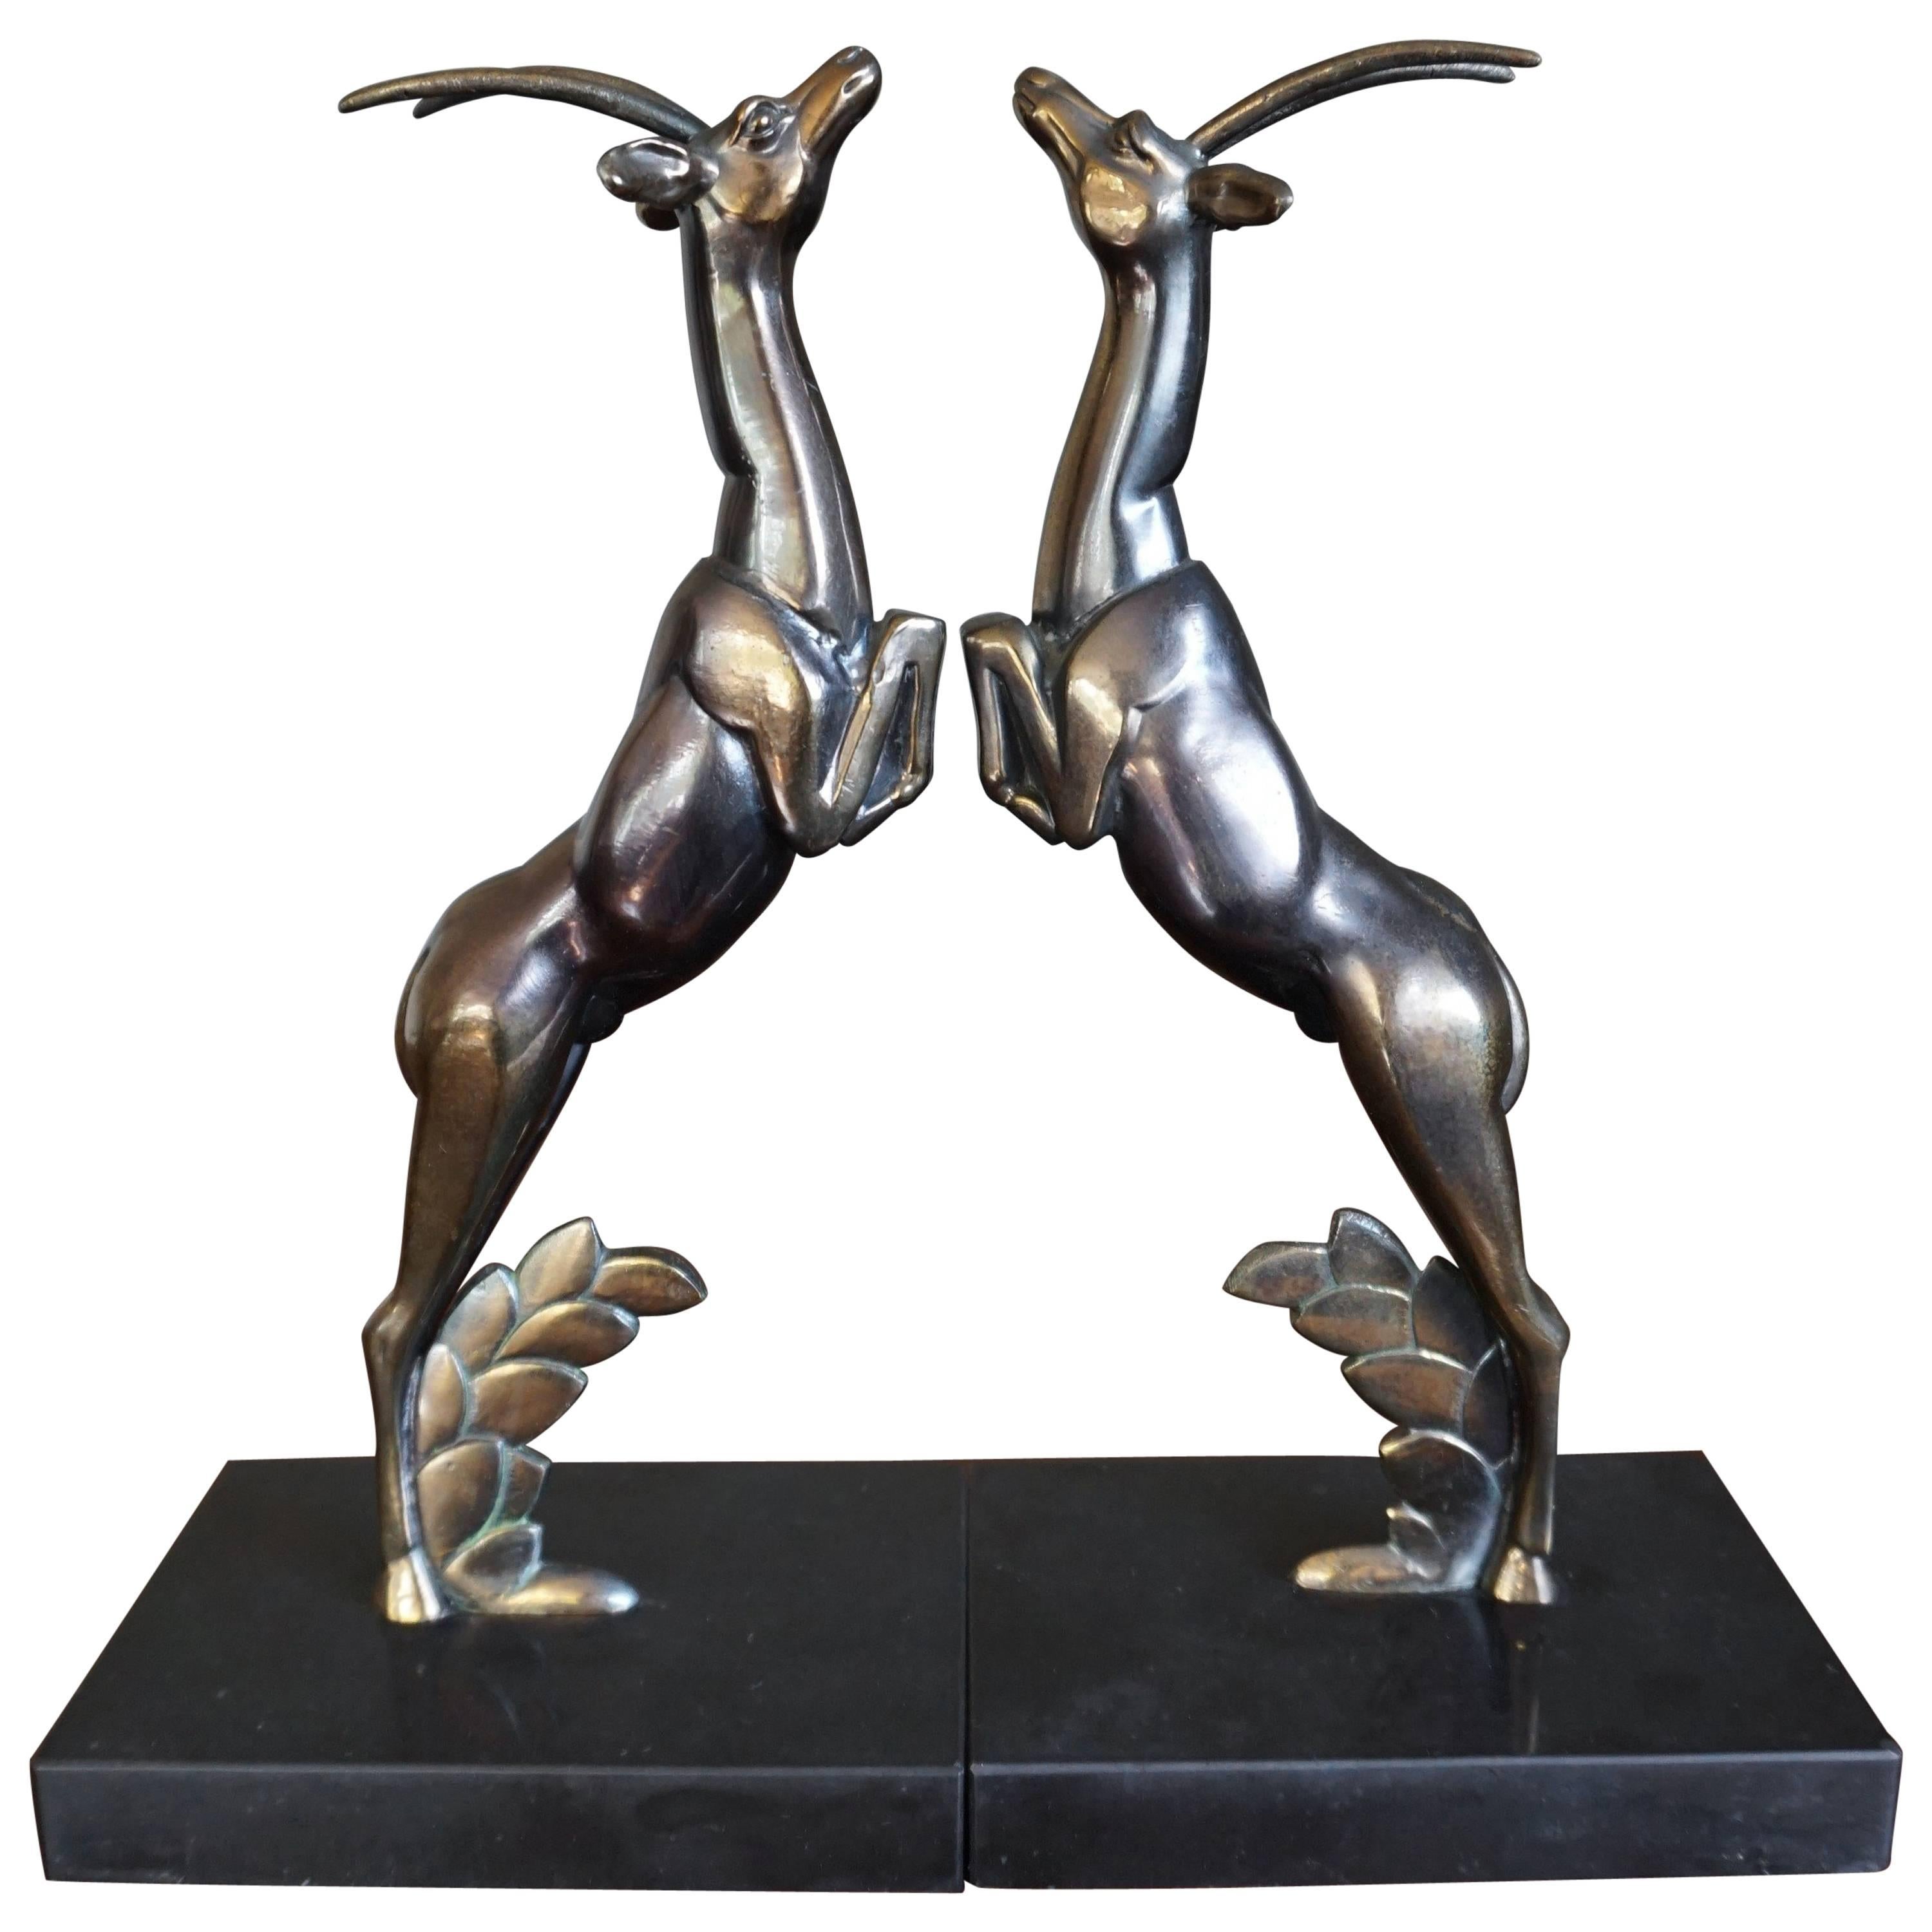 Pair of Art Deco Bookends with Brass Jumping Deer Sculptures on Marble Base